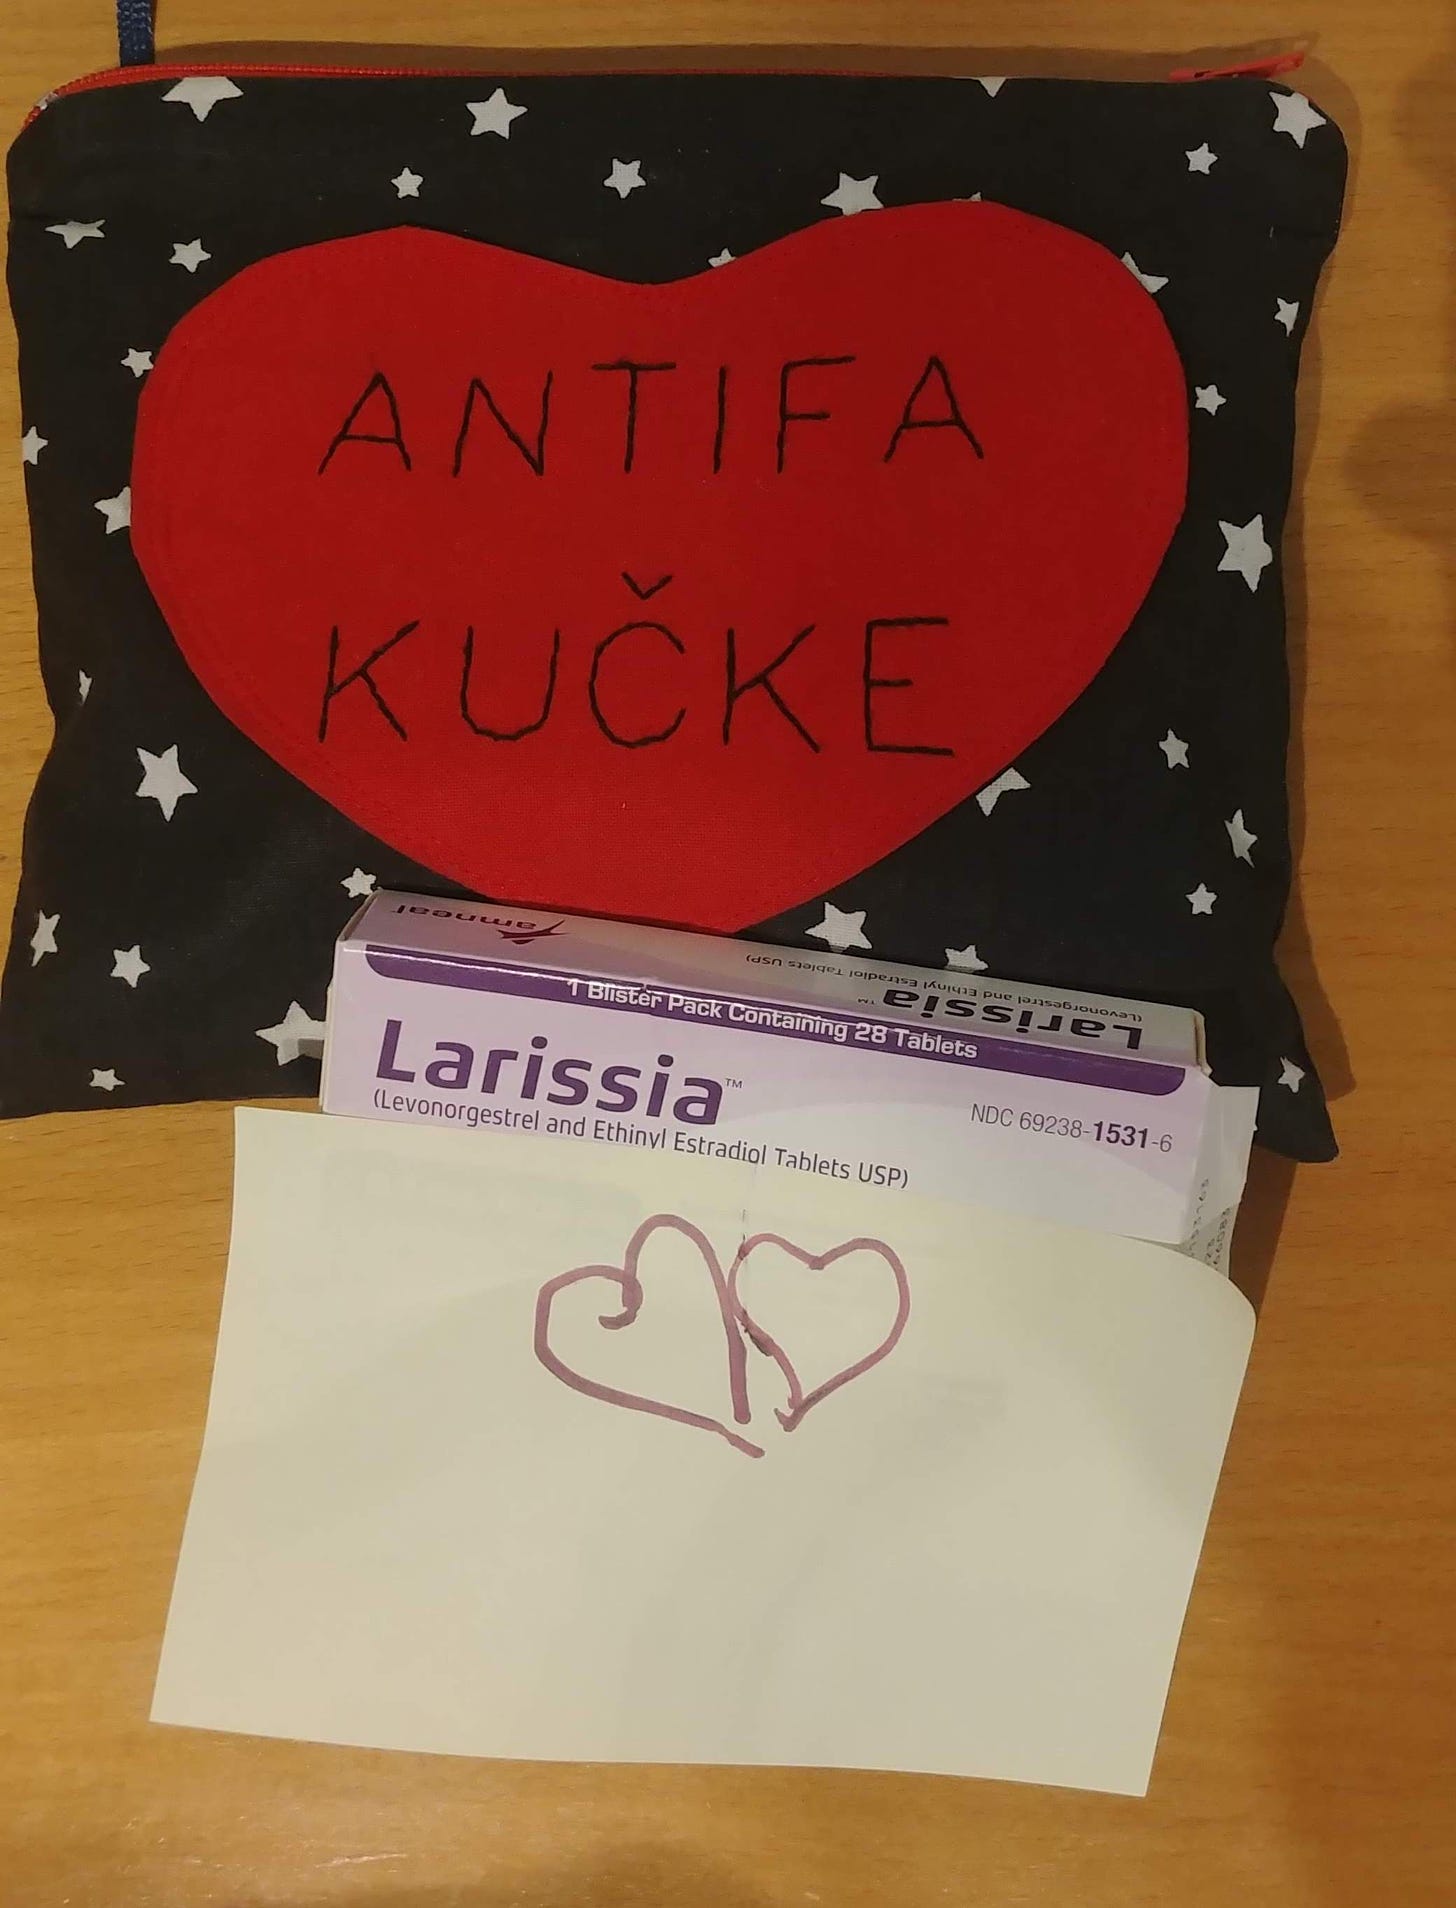 A photo of a table with several objects. At the top is a pencil case made out of black fabric with white stars on it. The front of the pencil case has a heart with "Antifa Kucke" stiched onto it. Below the pencil case is a box with Larissa, a type of birth control. Identifying details on the box are covered with a post-it that has a heart drawn on it.